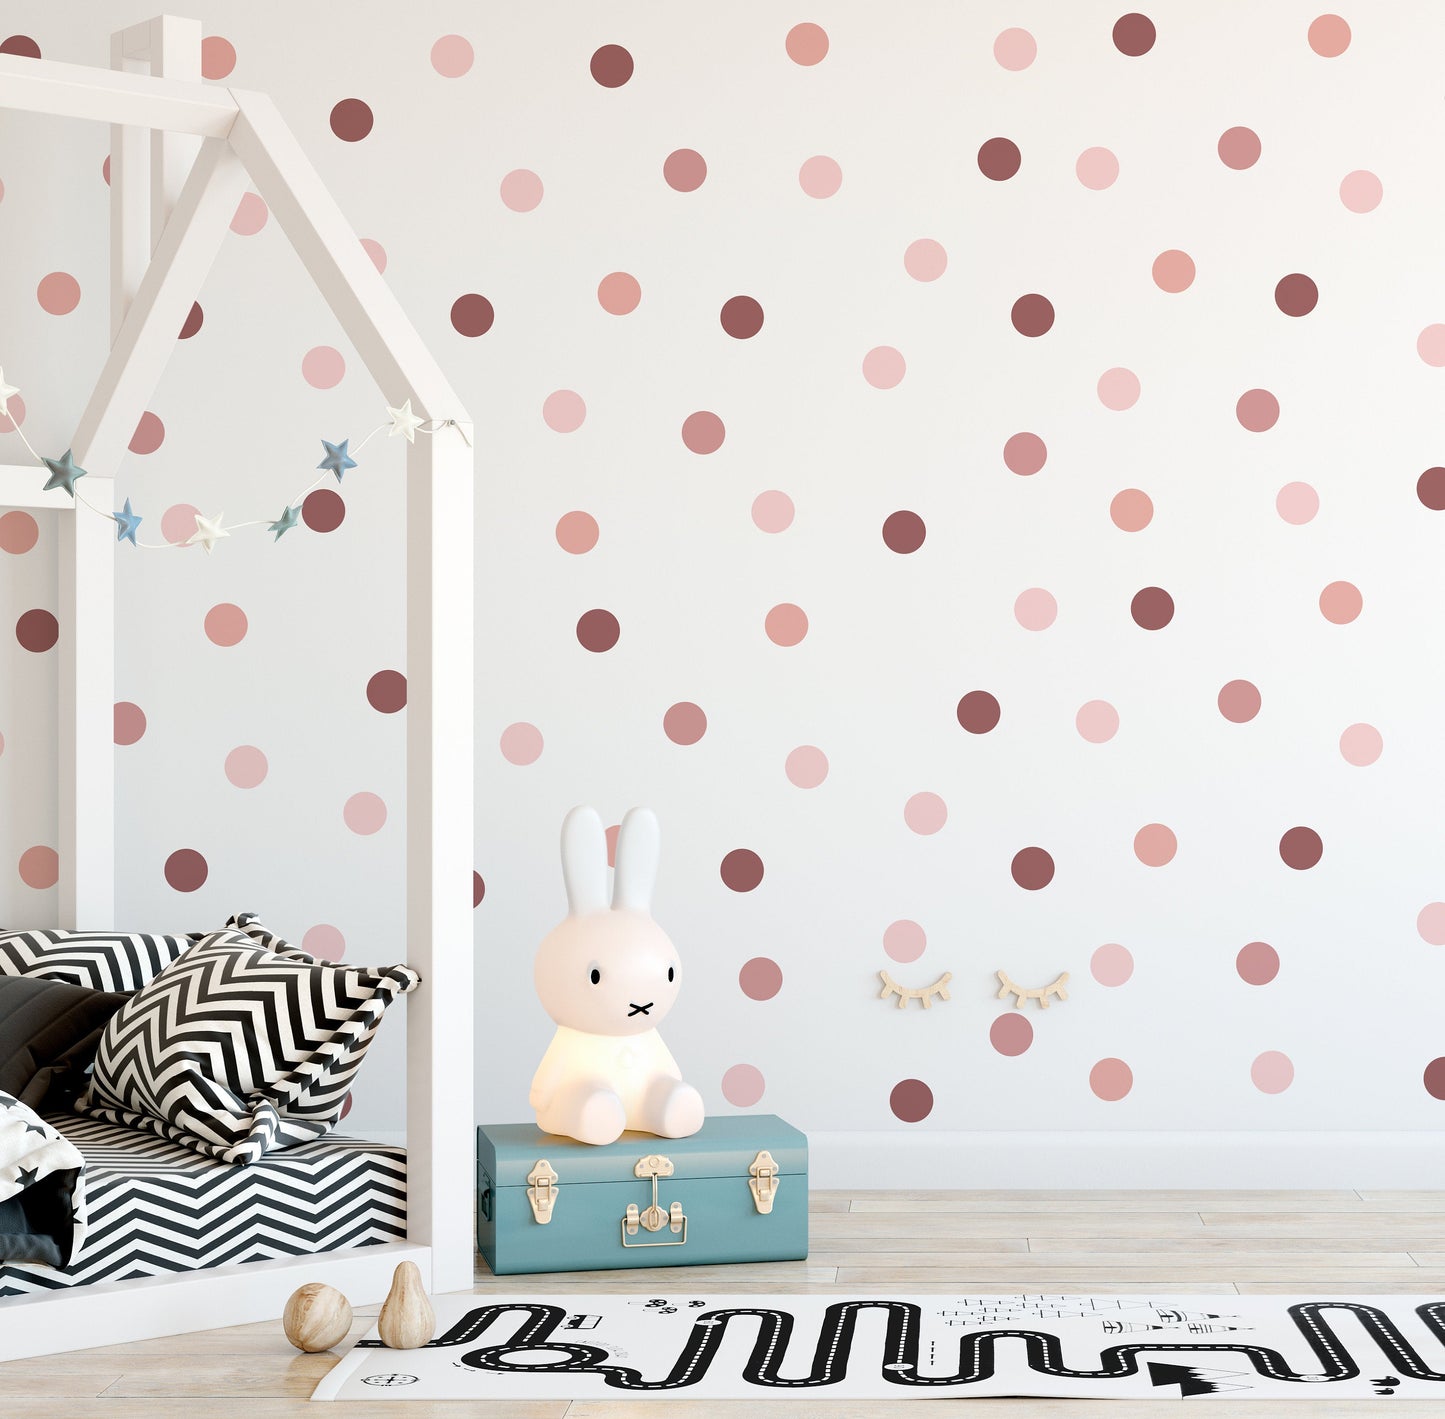 Rose Gold Colour Polka Dot Wall Stickers Decals